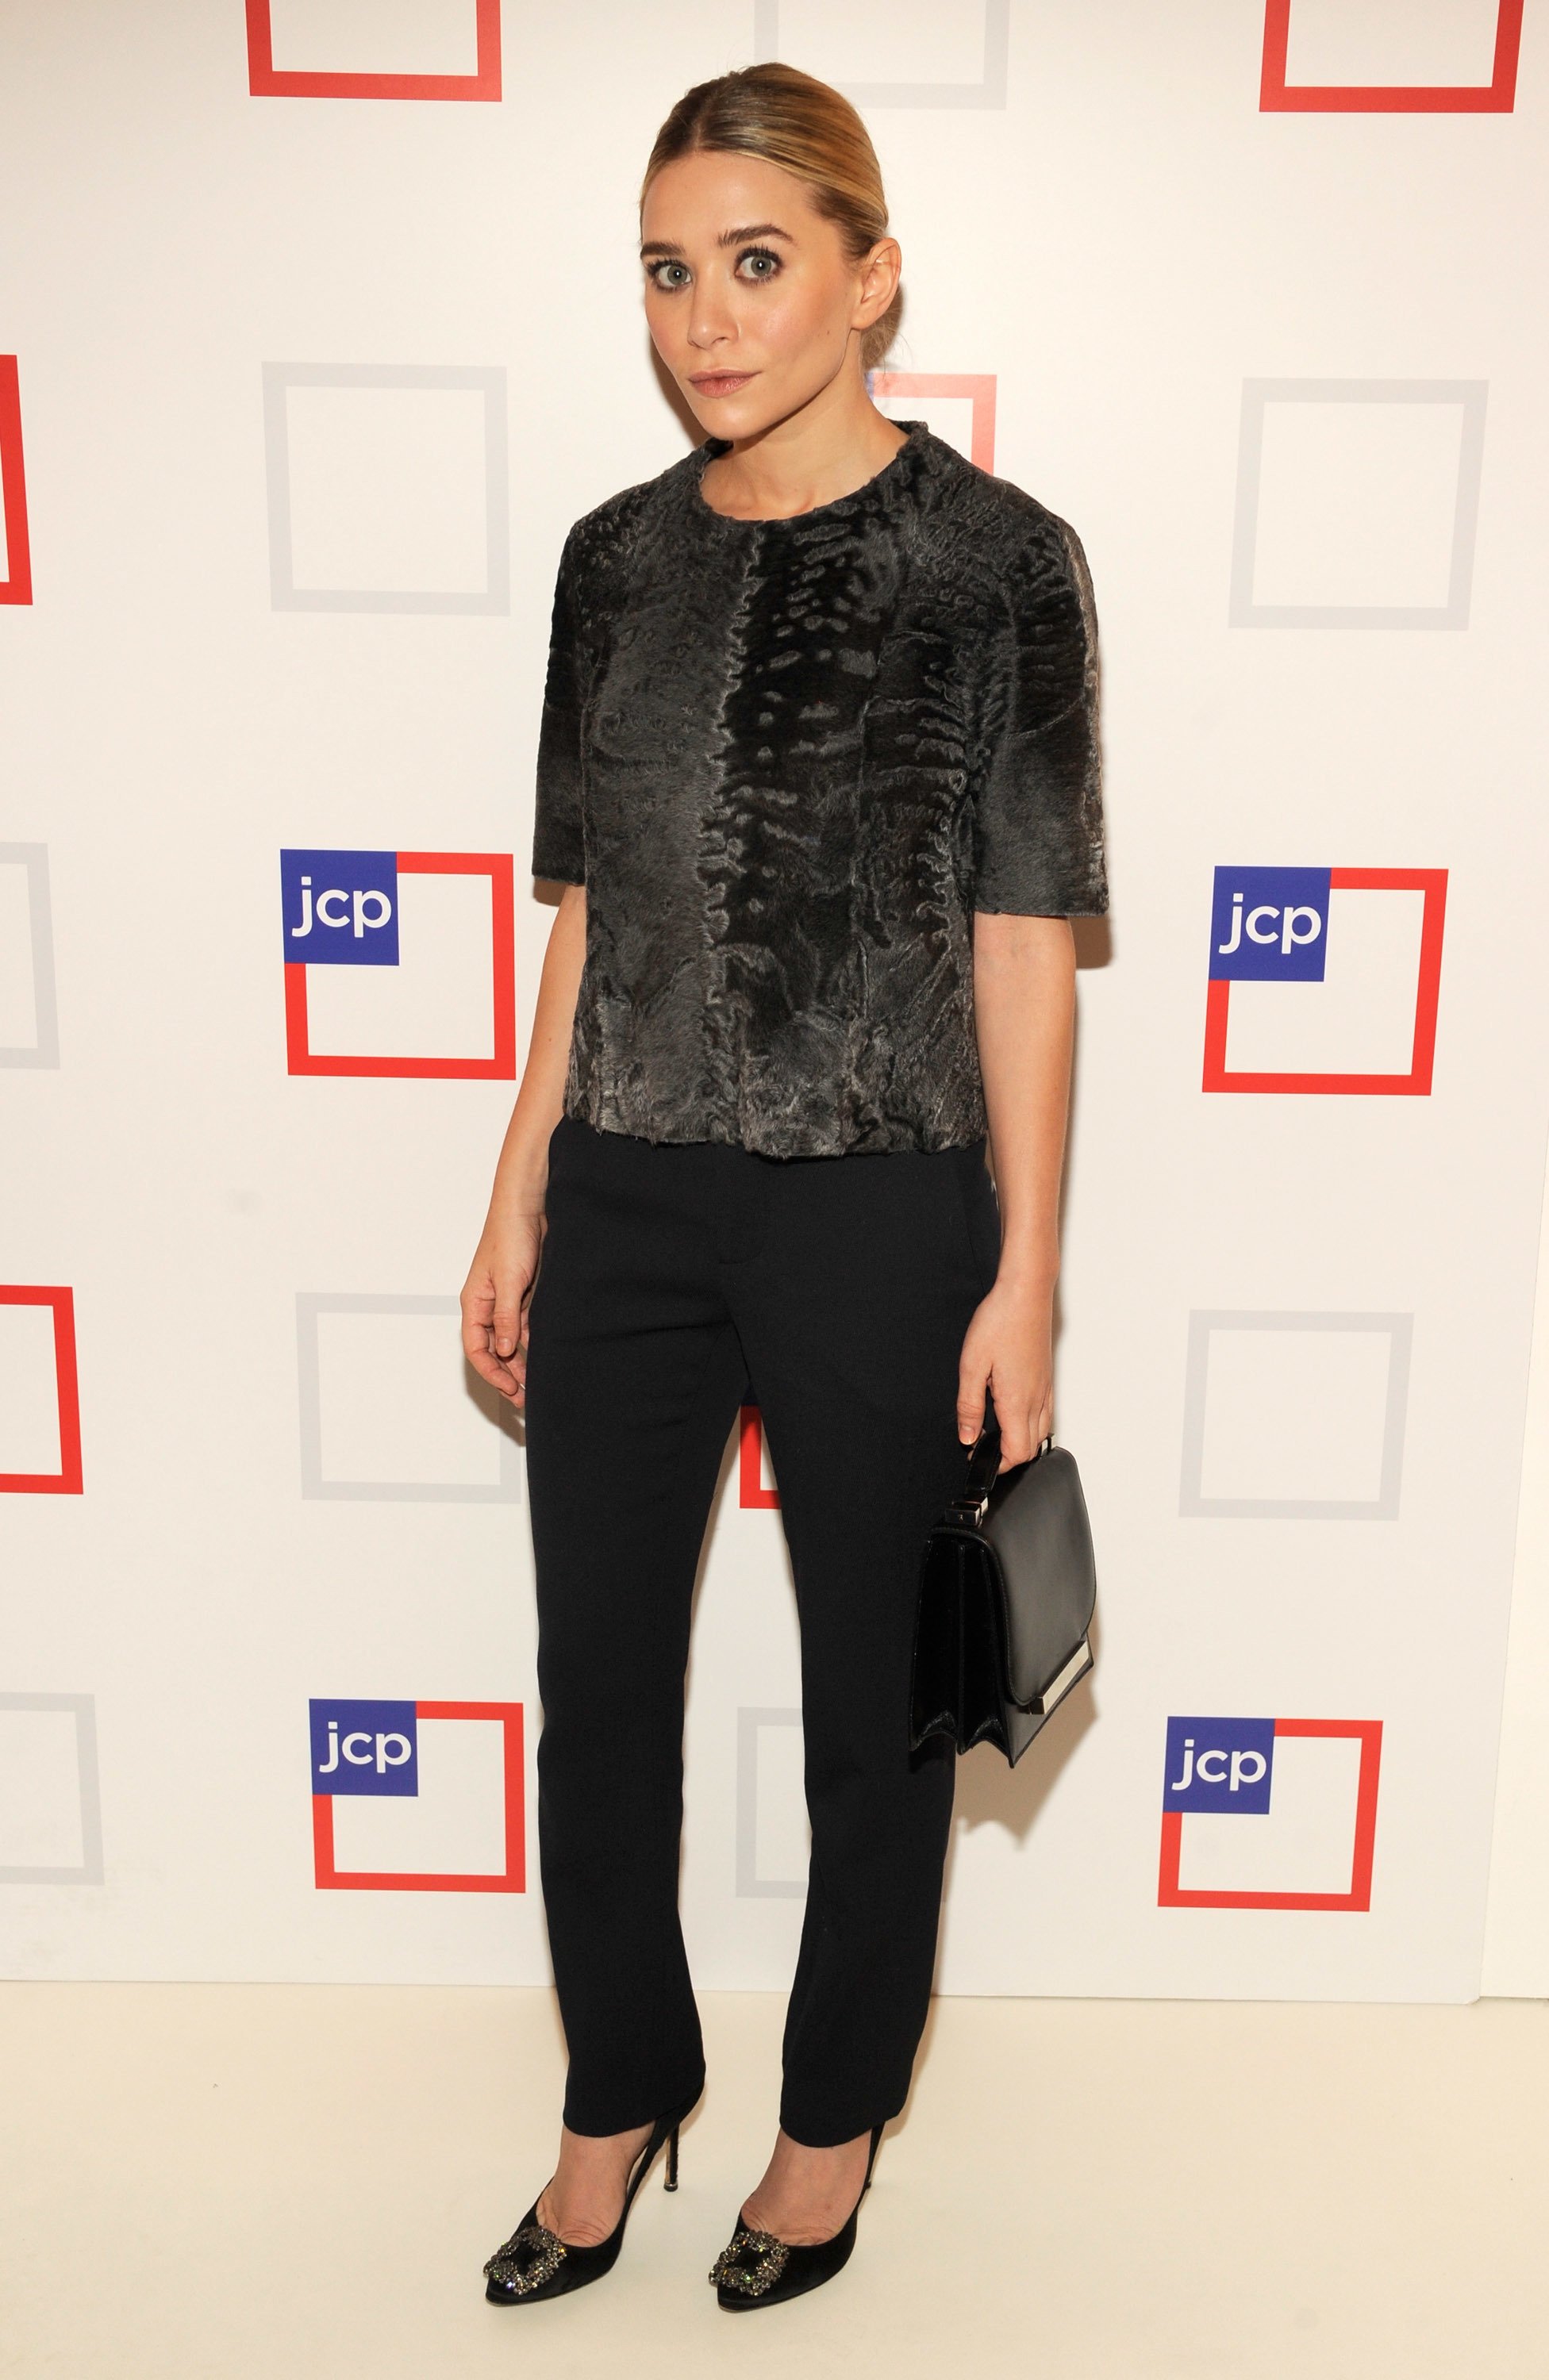 Ashley Olsen attends the jcpenney launch event at Pier 57 on January 25, 2012 in New York City. | Photo: Getty Images